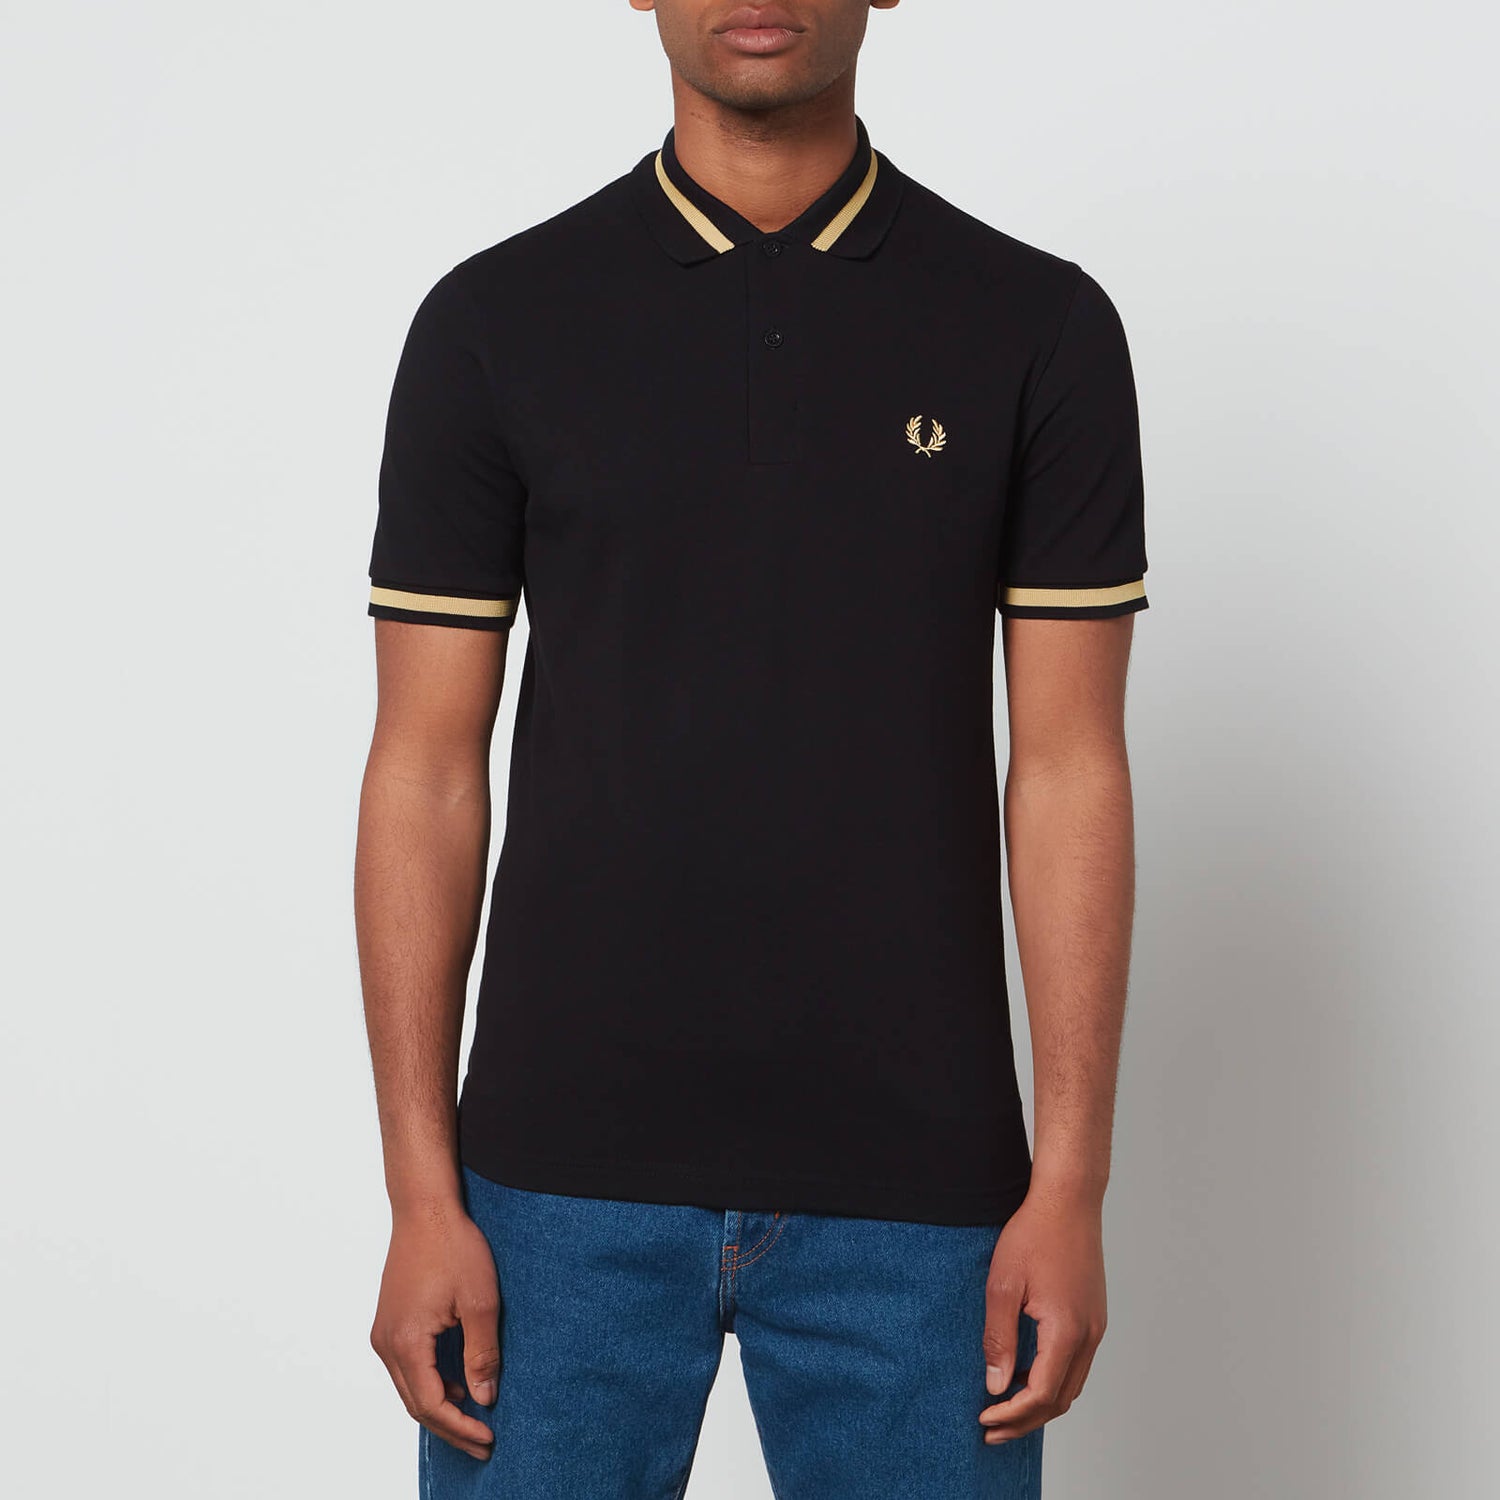 Fred Perry Men's Made In England Single Tipped Polo Shirt - Black/Champagne - 38/S